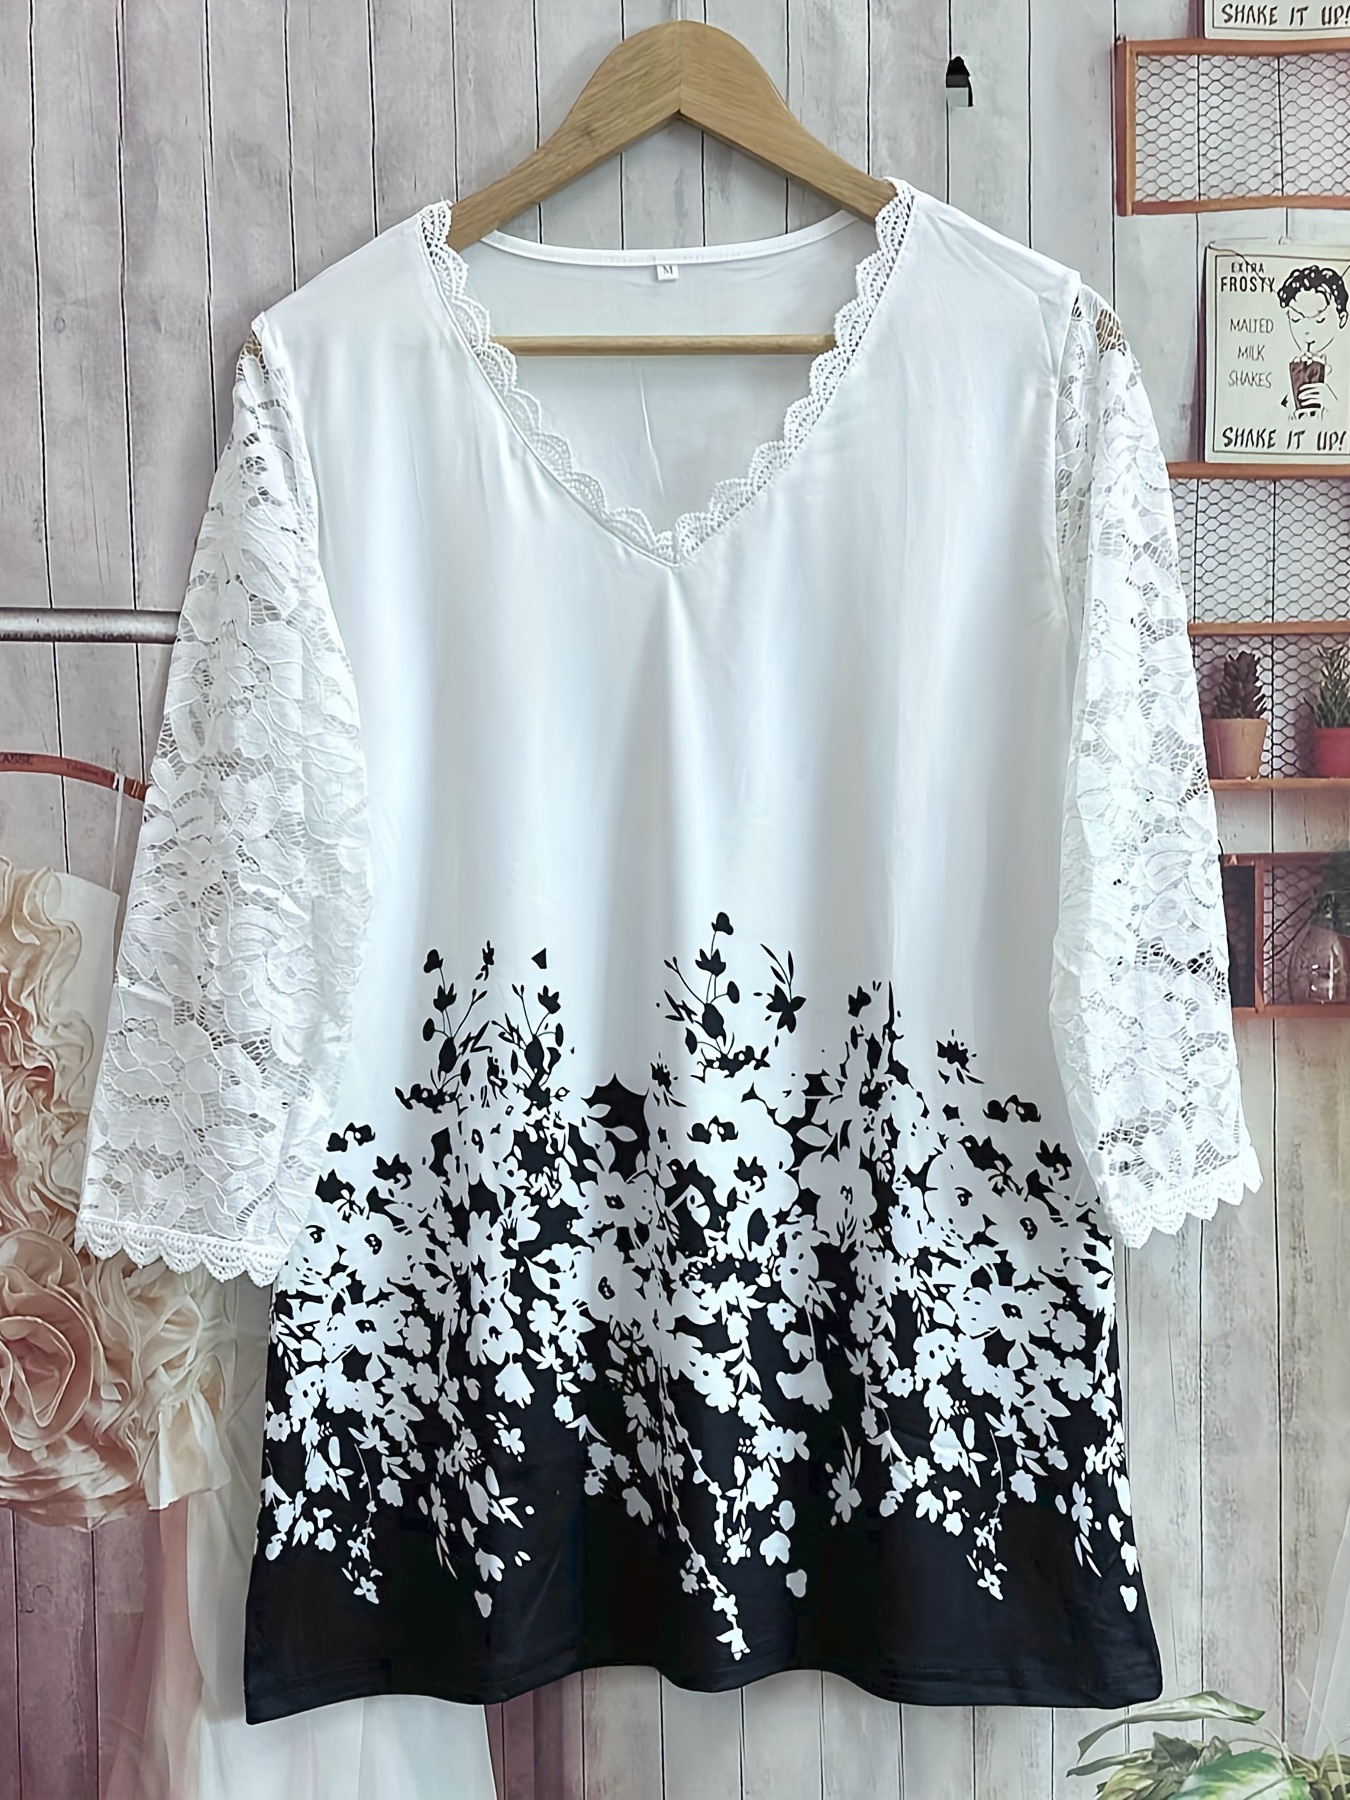 Women's Casual Top Lace Half Sleeve V-Neck Floral Print